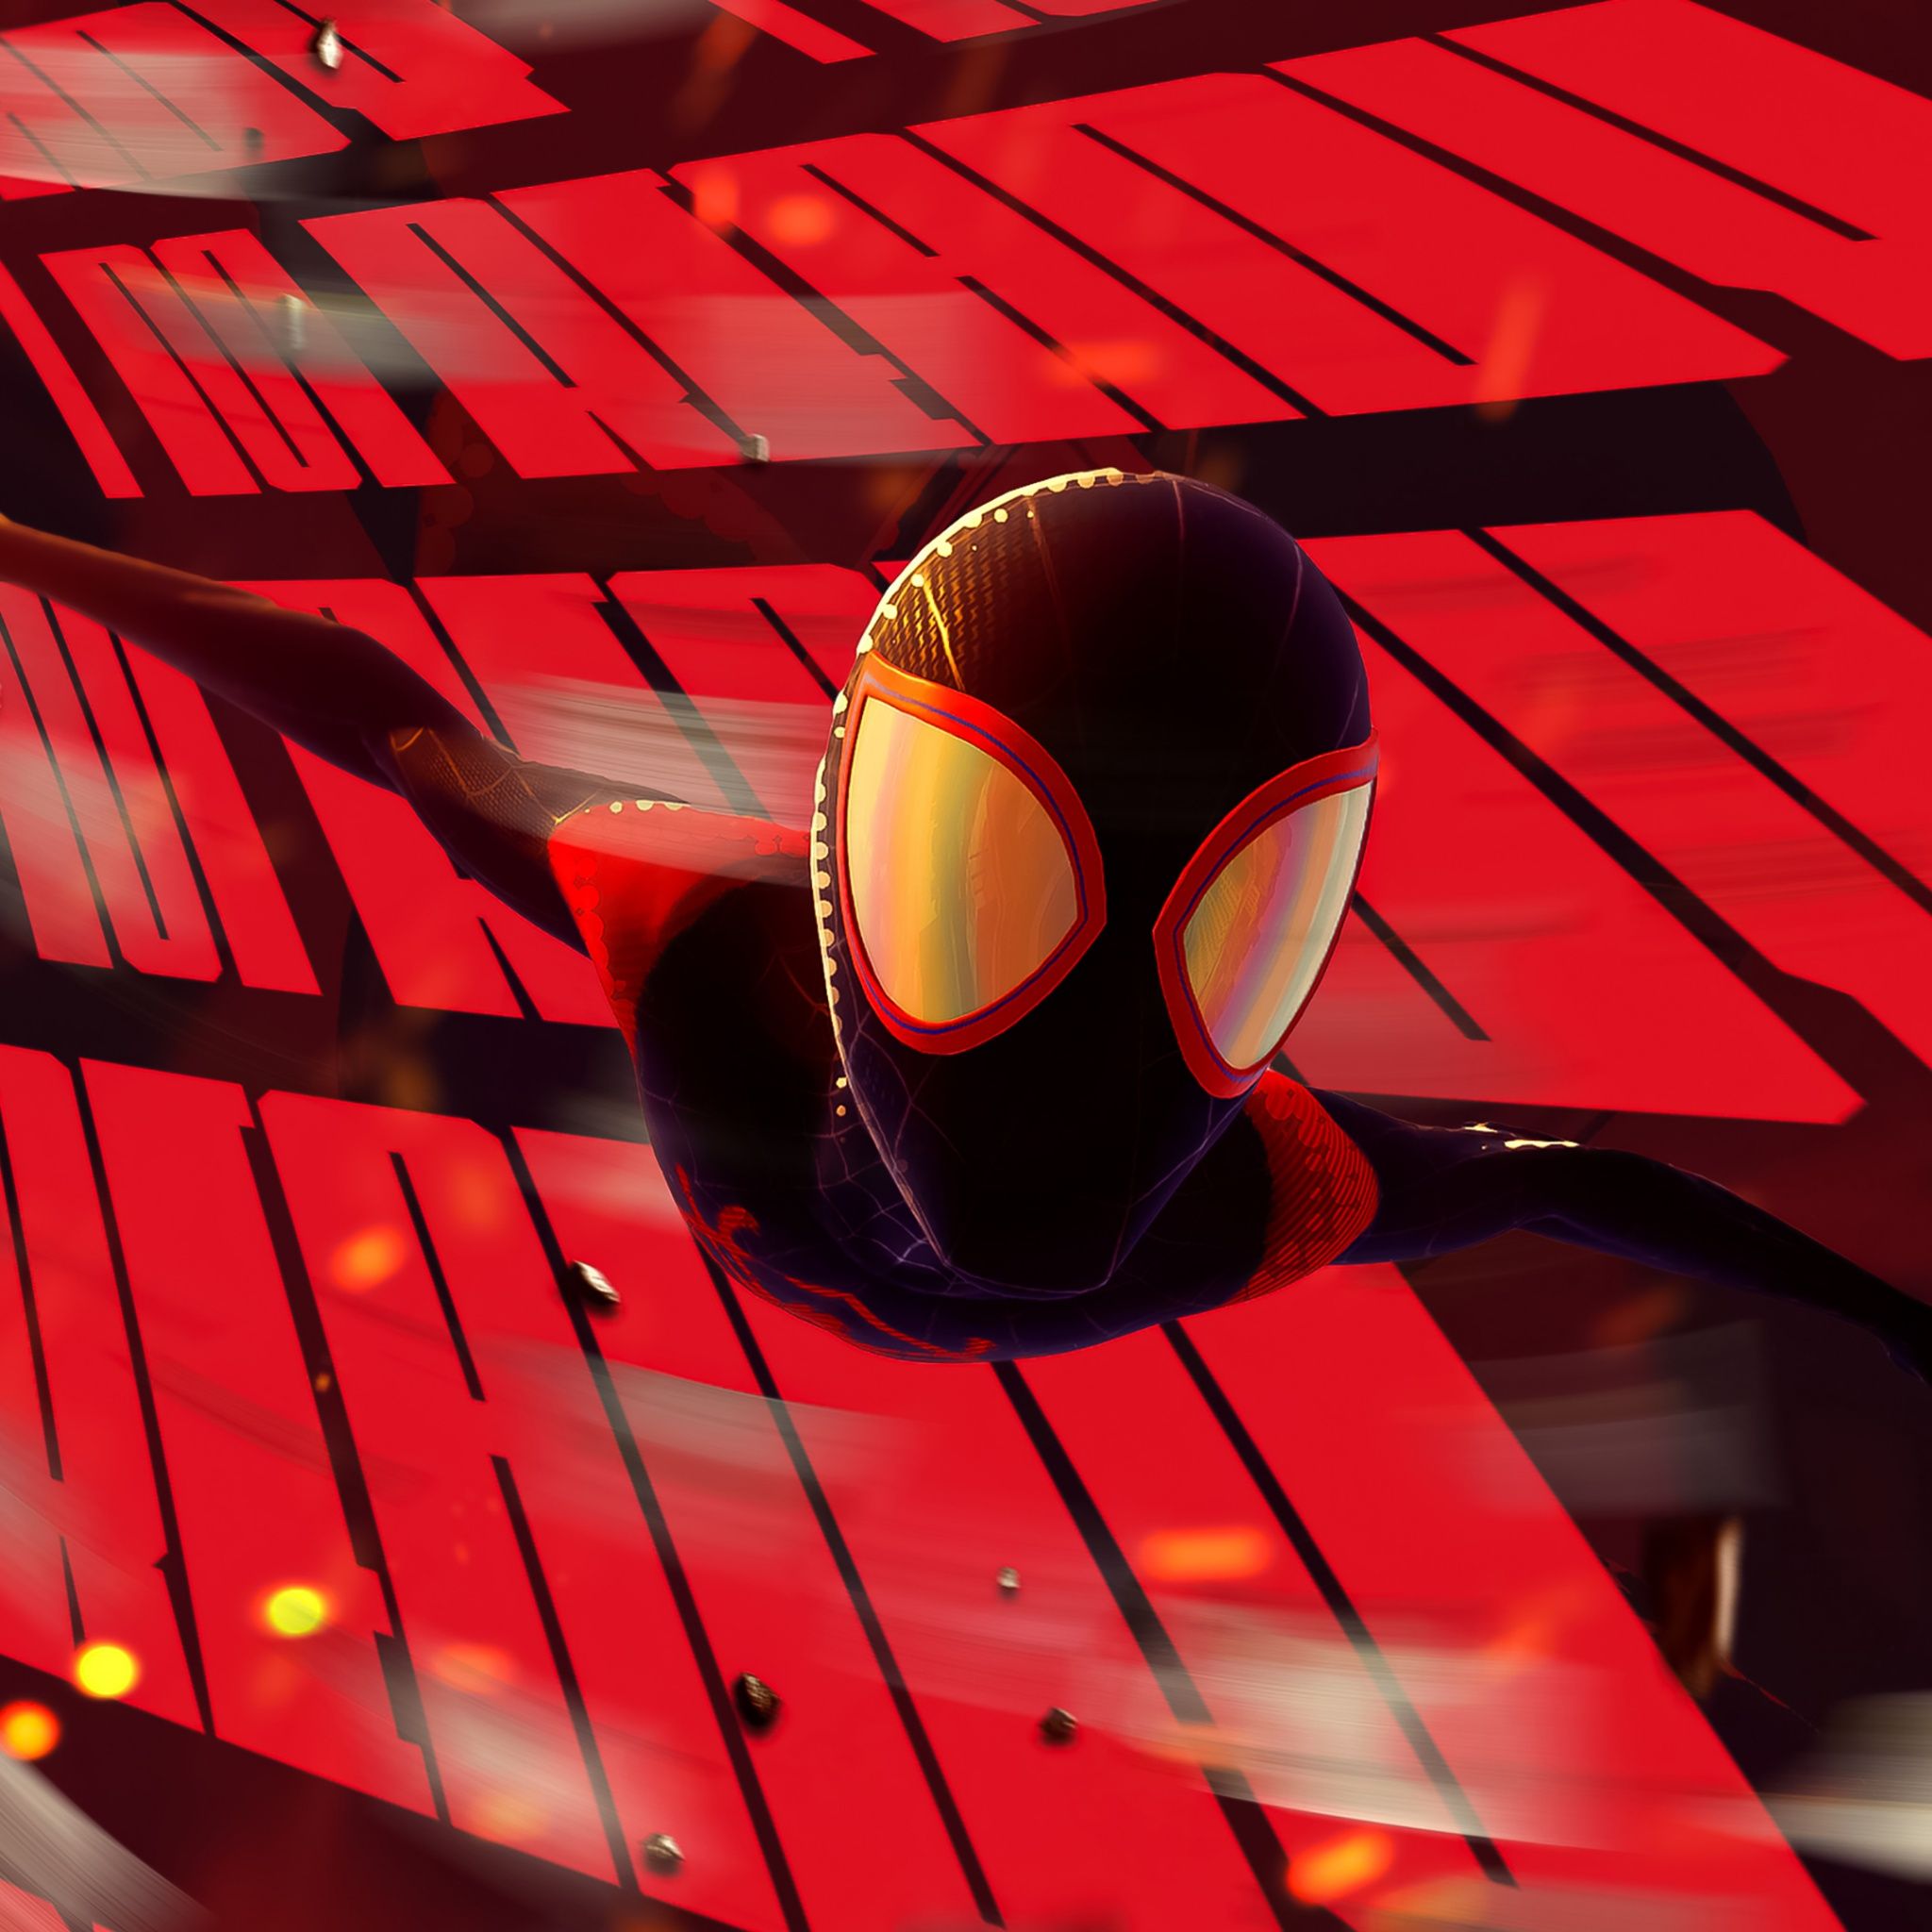 Miles Morales swinging through the city in his Spider-Man suit - 